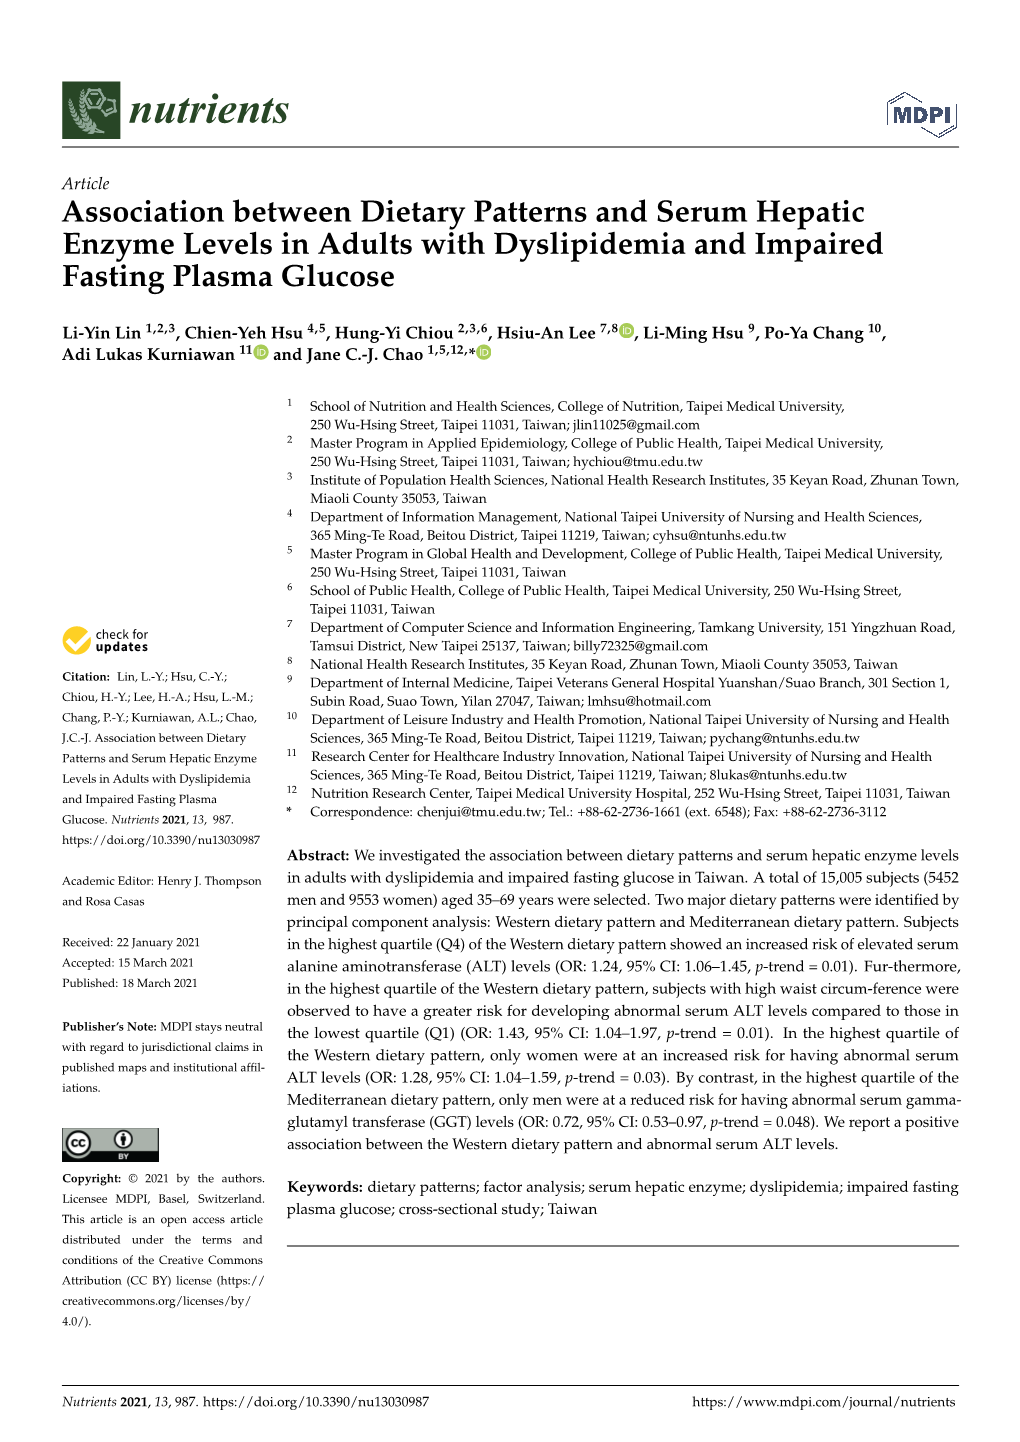 Association Between Dietary Patterns and Serum Hepatic Enzyme Levels in Adults with Dyslipidemia and Impaired Fasting Plasma Glucose